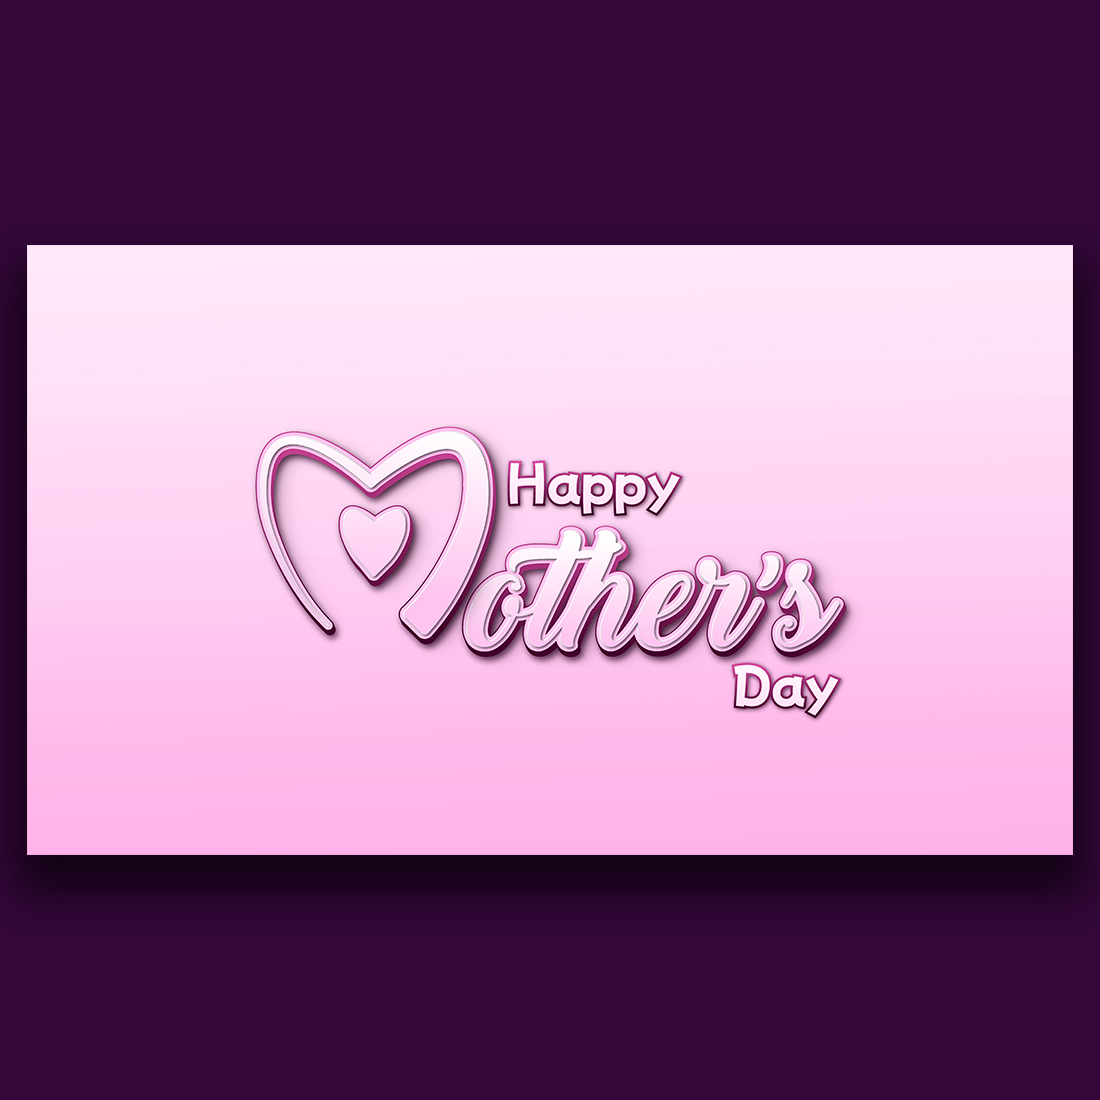 Happy mother's day greeting background design with 3D heart Shape preview image.